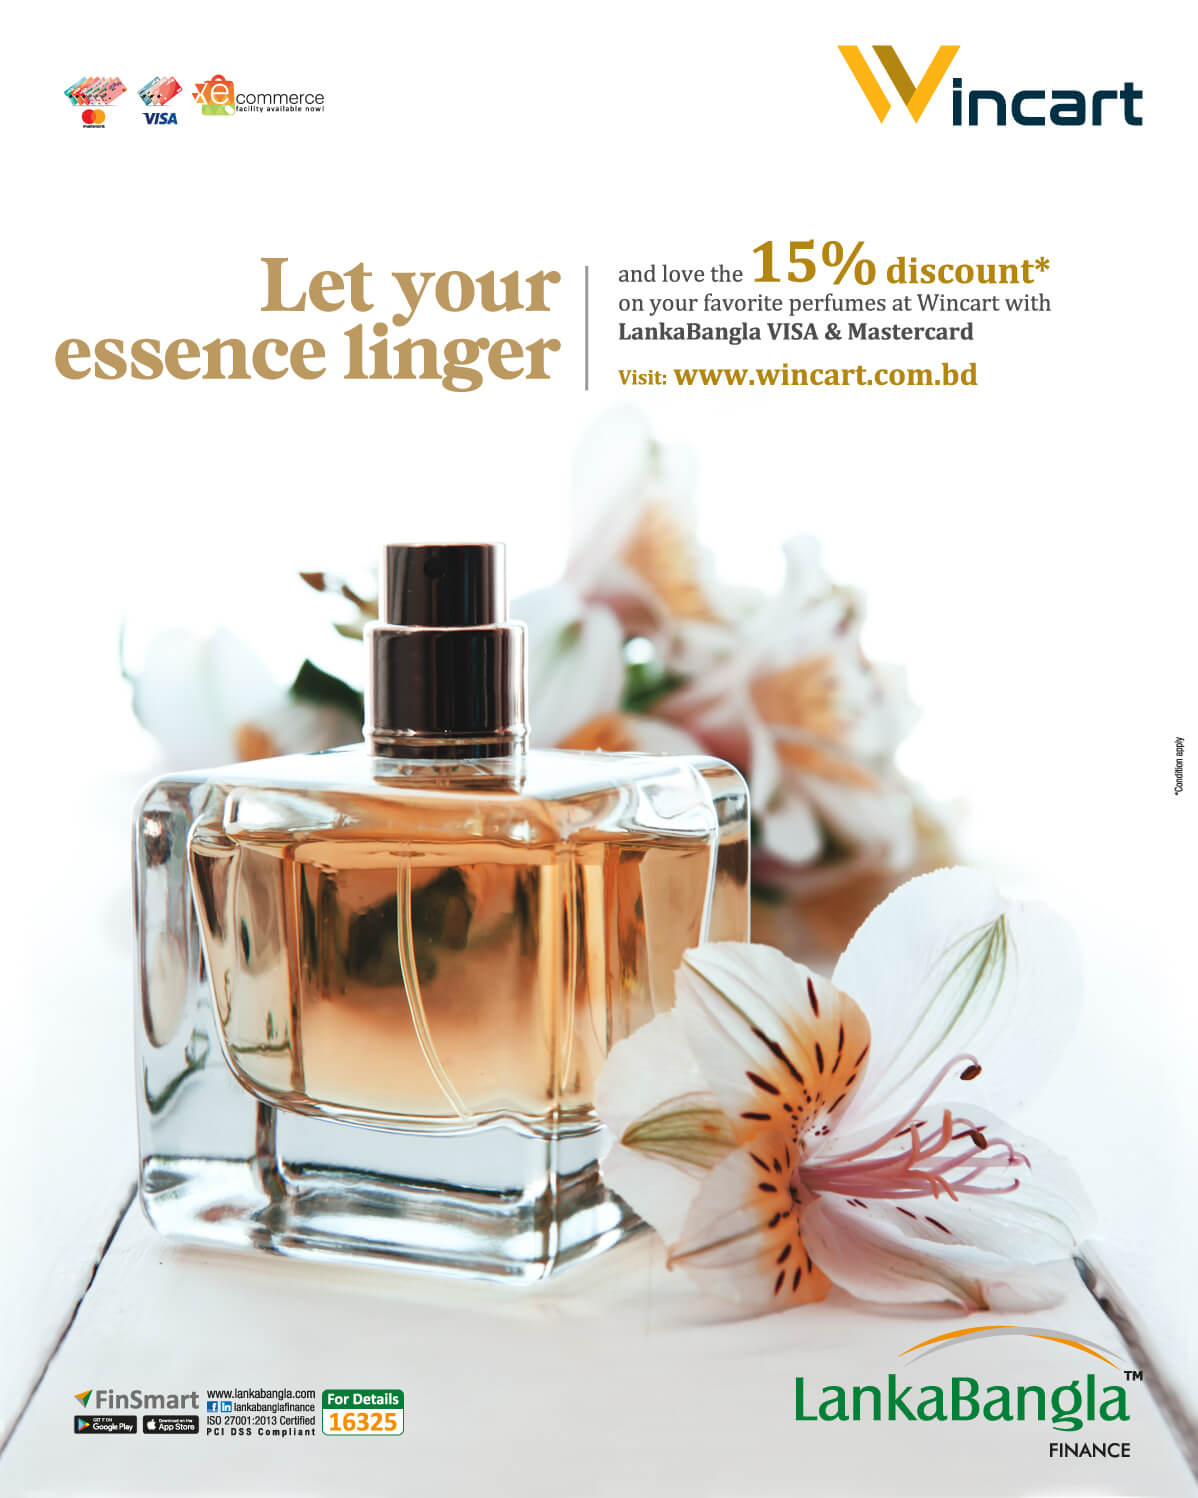 Get 15% discount on your favorite perfumes at Wincart